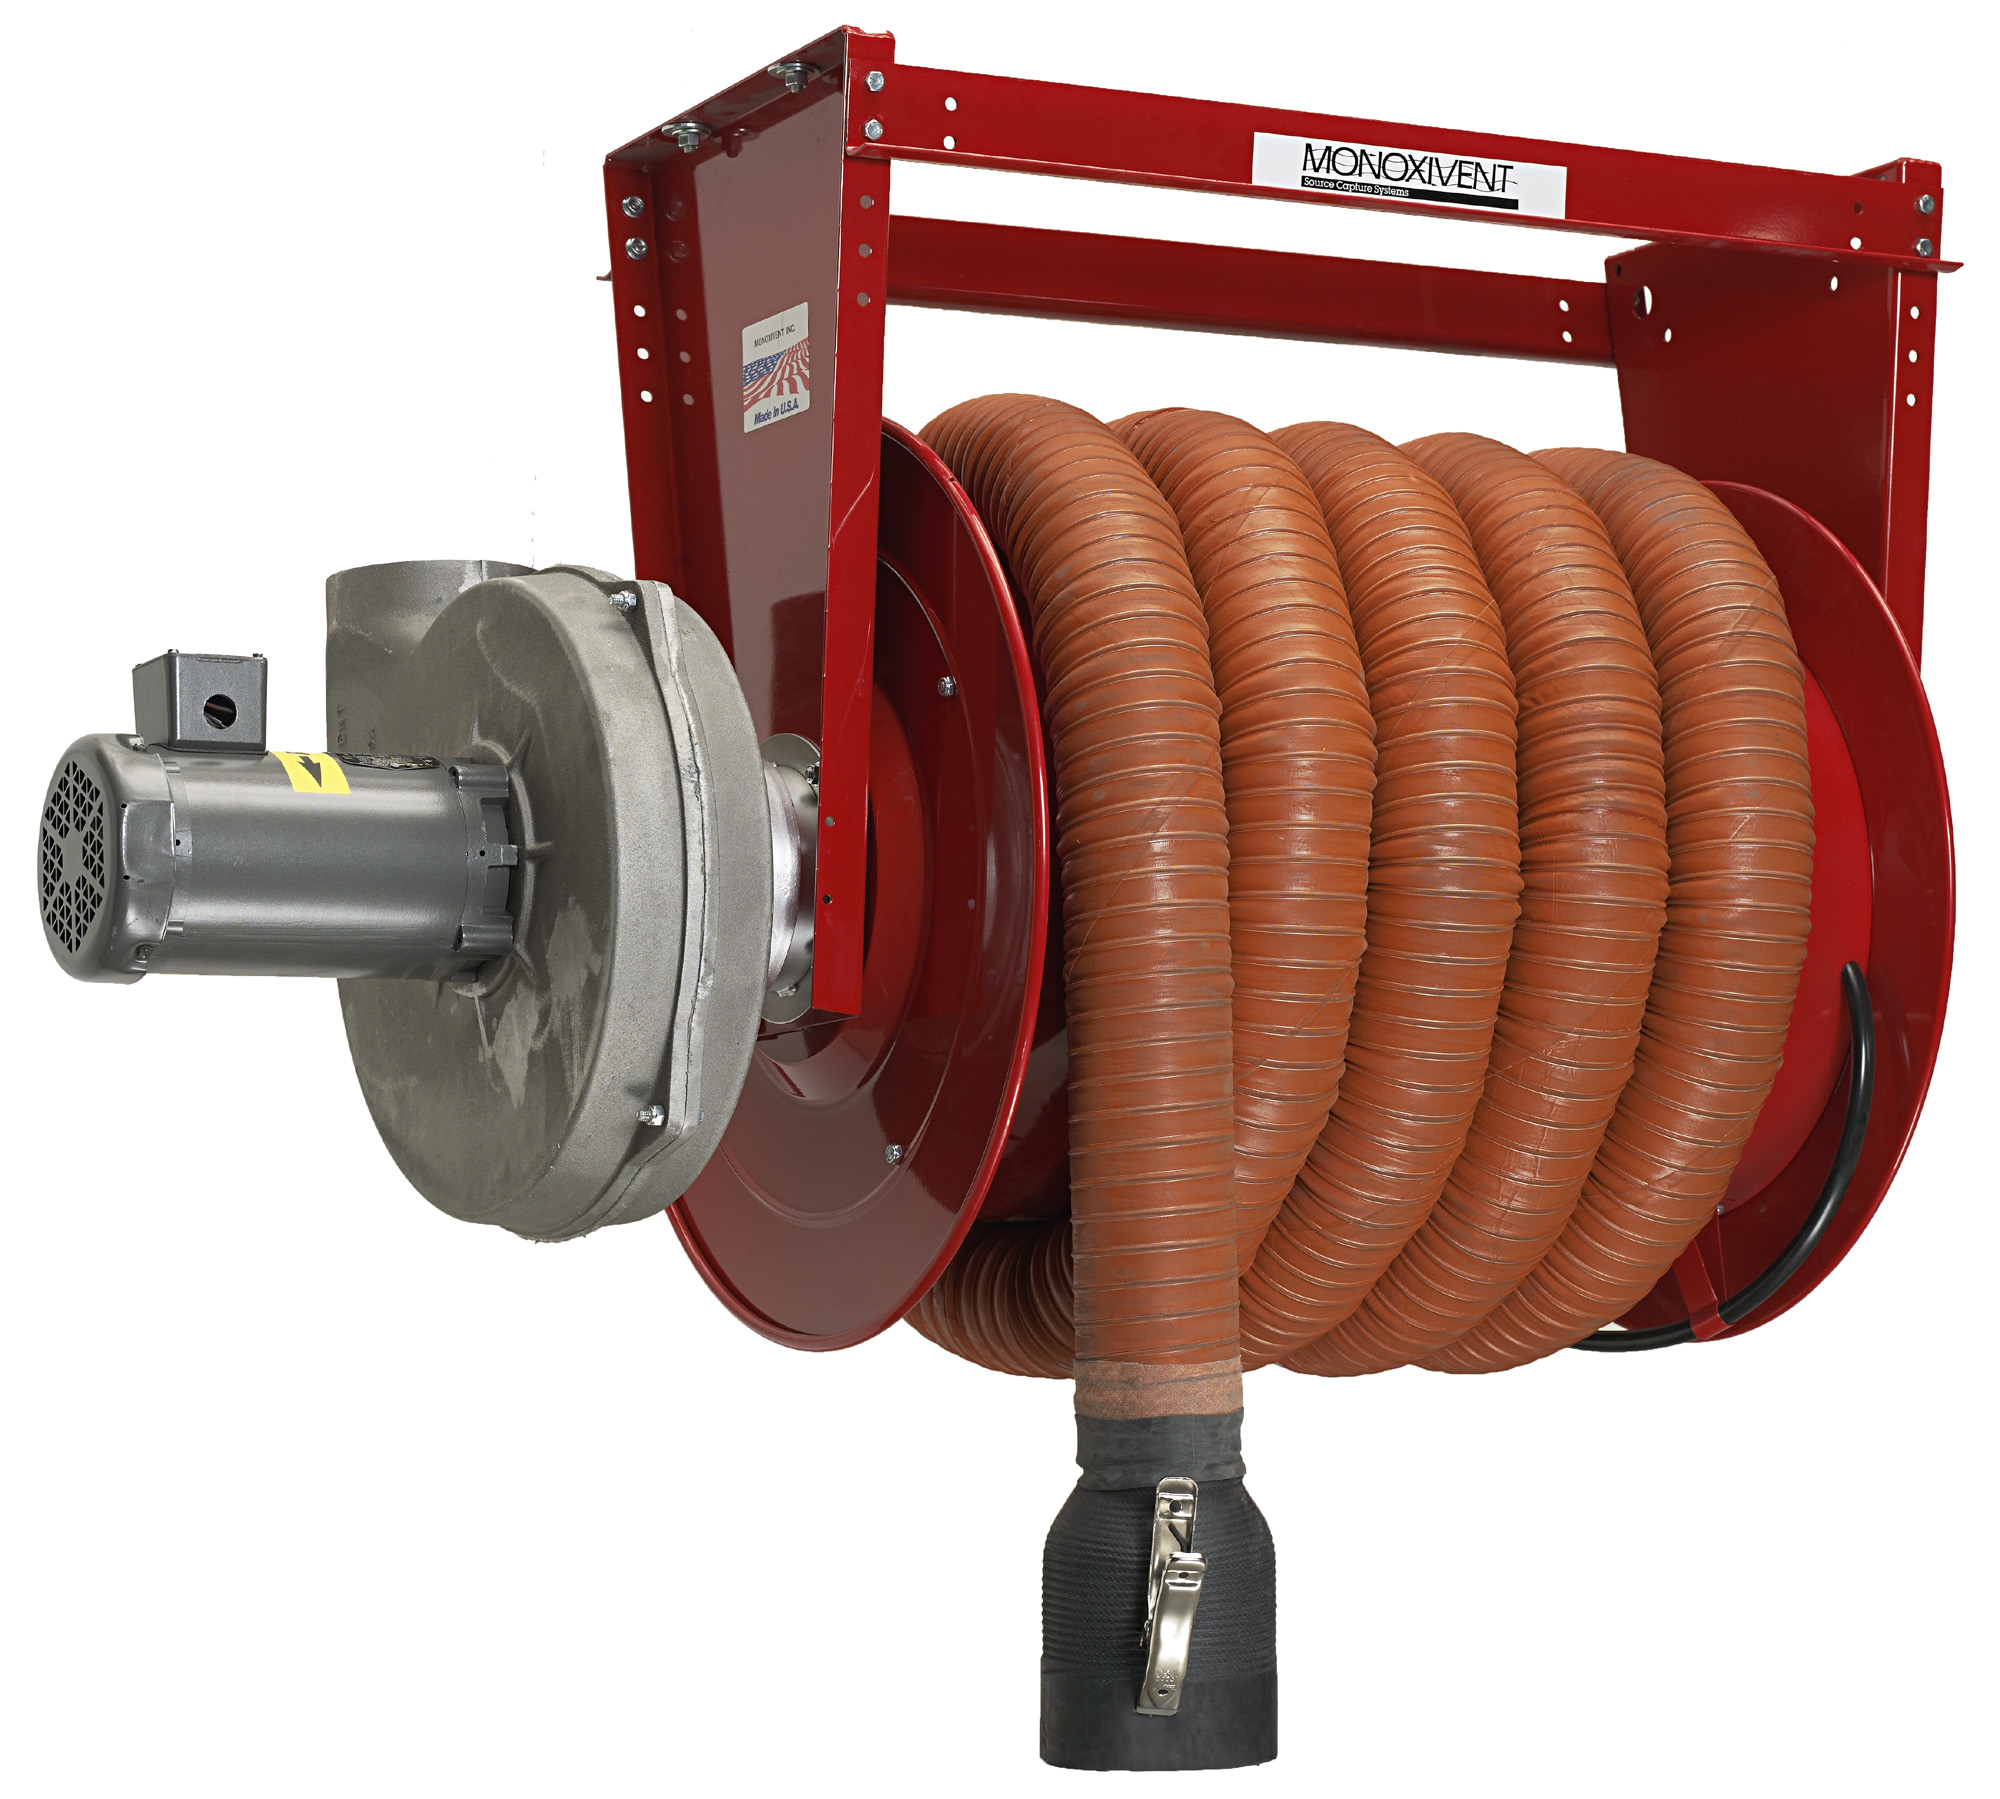 Exhaust Hose Reels  Firehouses, Warehouses and Garages